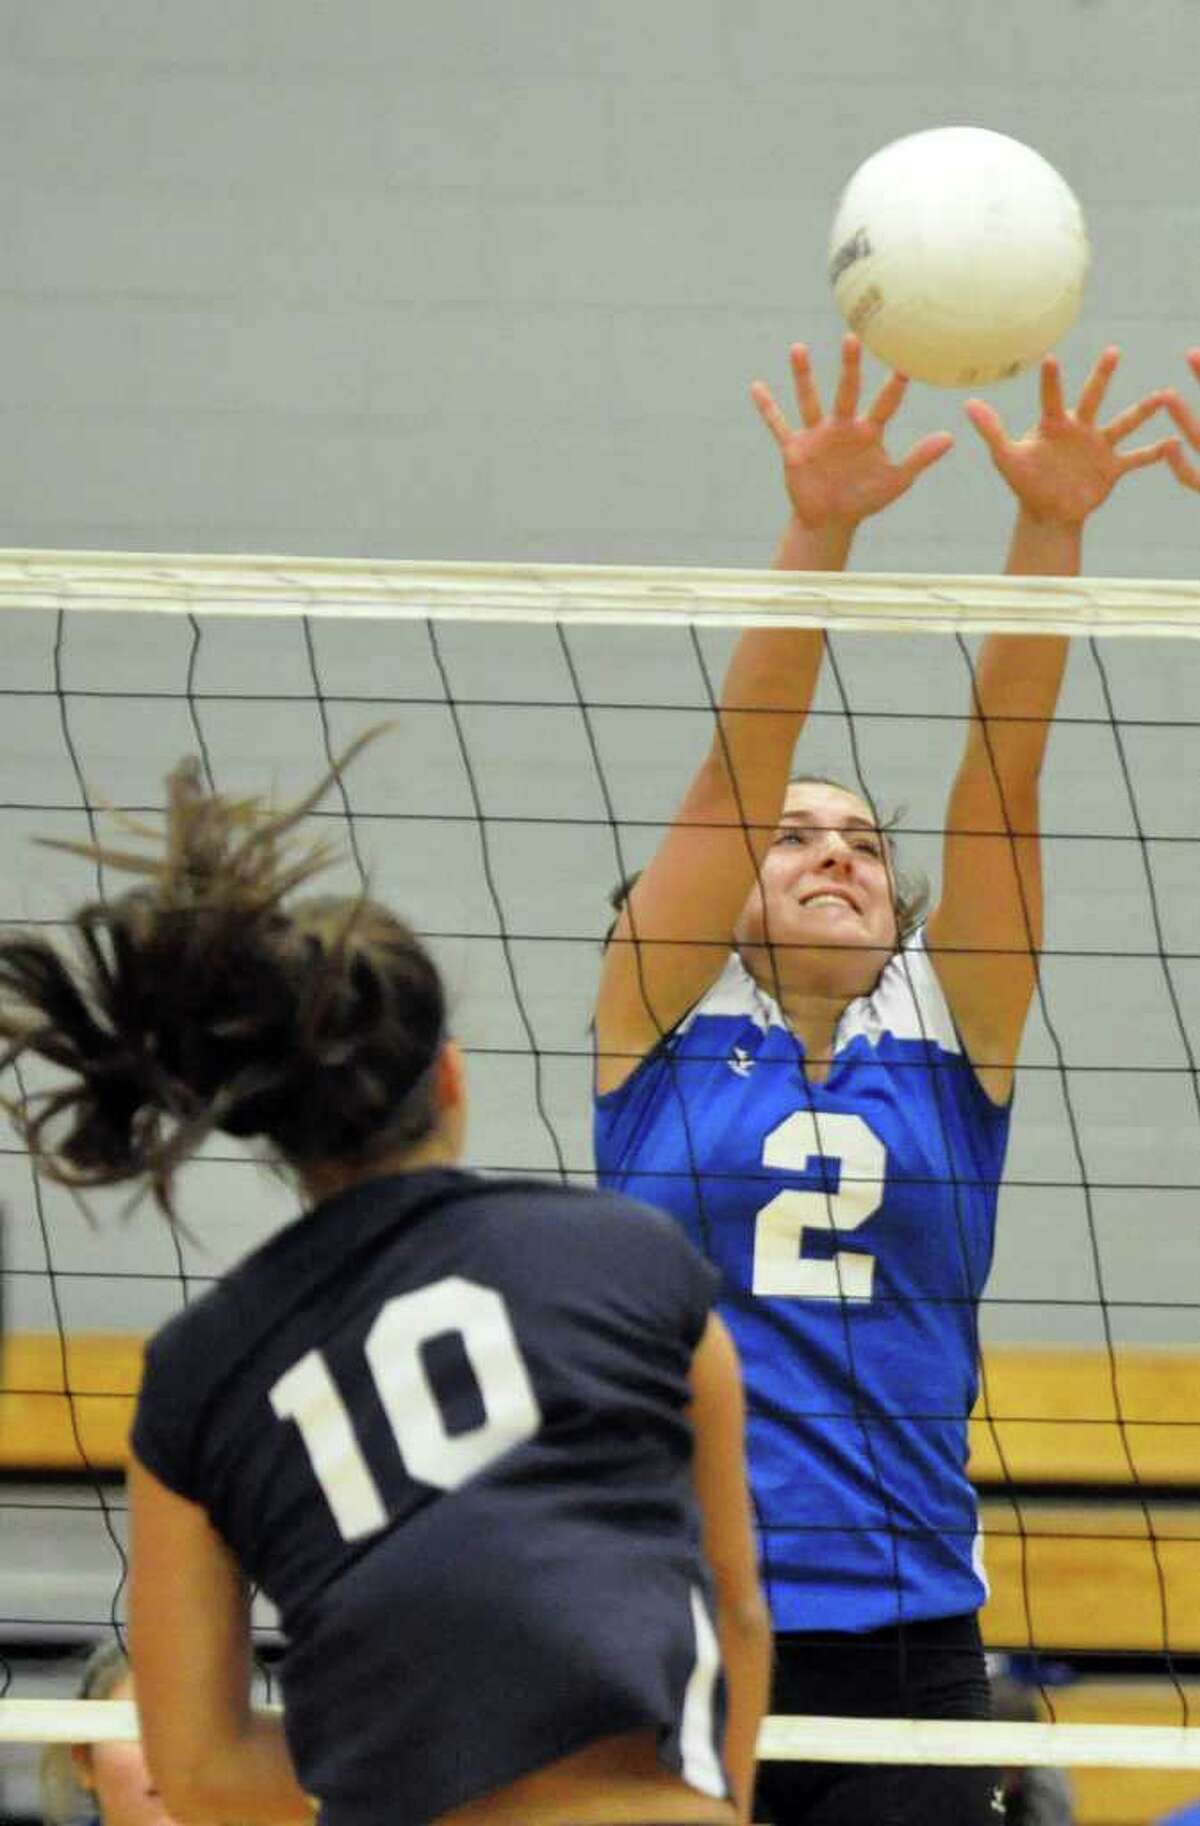 Fairfield Ludlowe's Brandi Segala blocks a shot by Staples' Alex Masiello during the girls volleyball game at Ludlowe on Wednesday, Oct. 13, 2010.